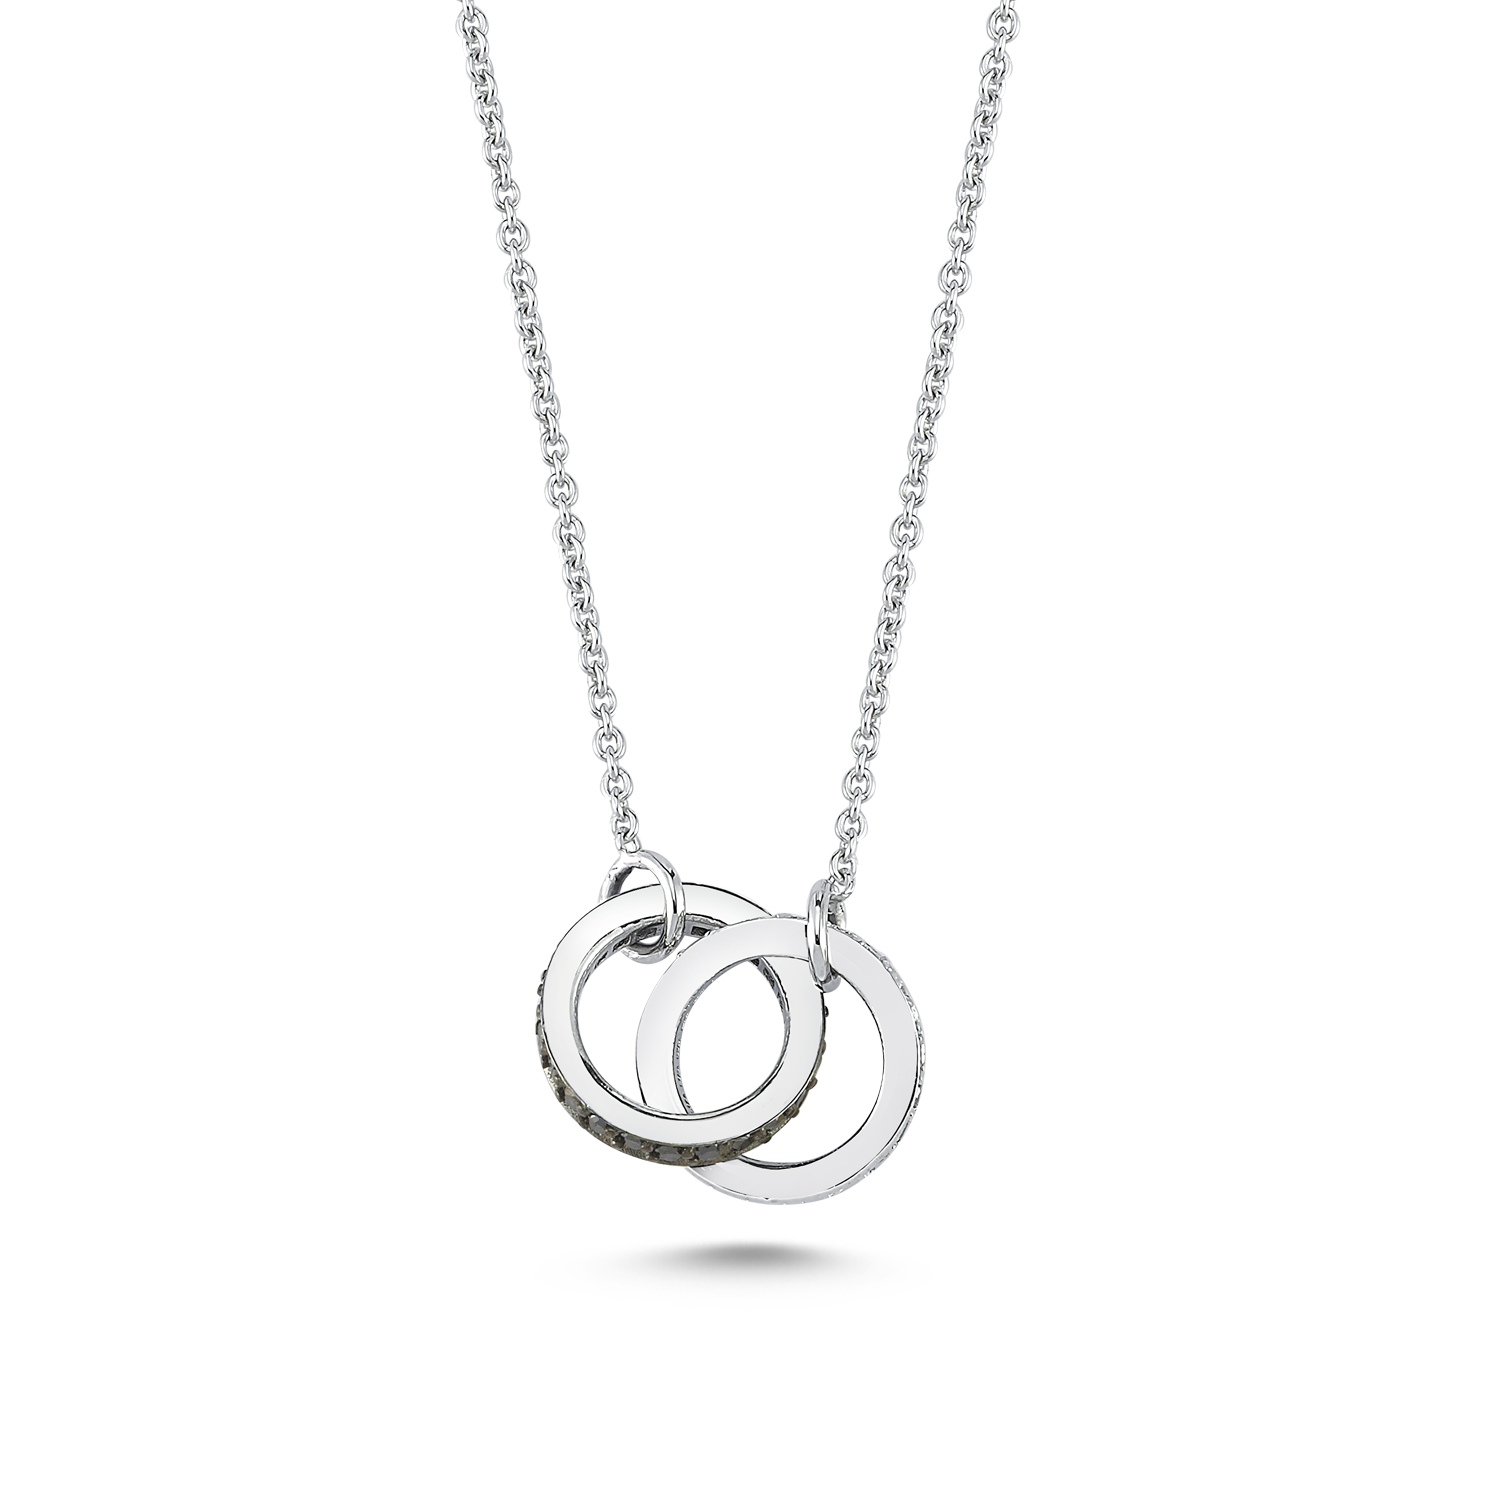 Double Ring Black and White Diamond Necklace